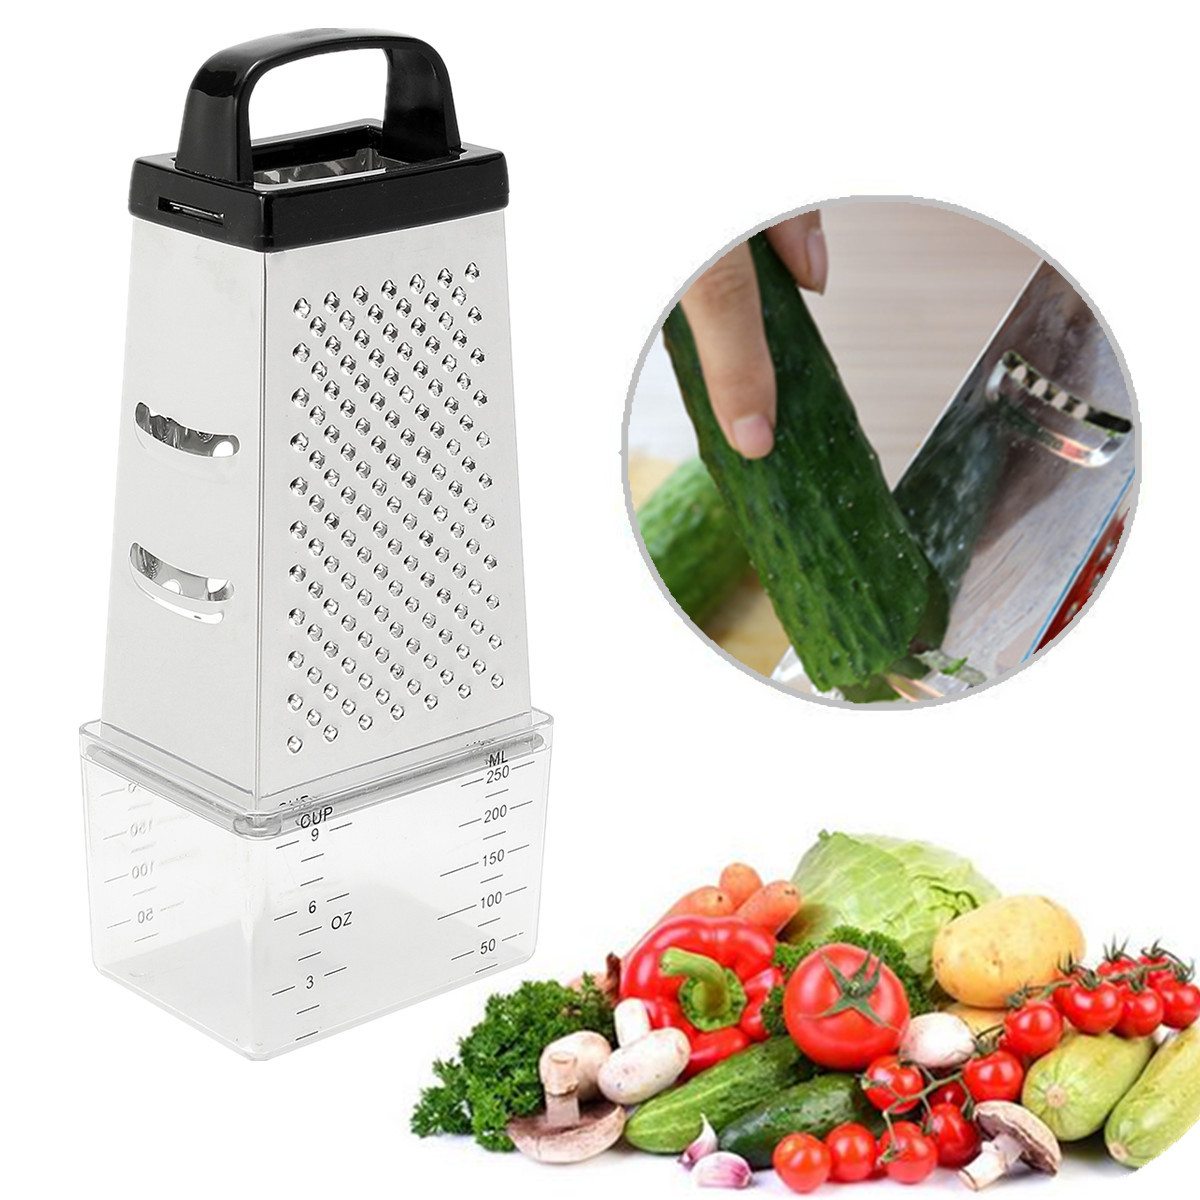 Grater-Box-Stainless-Steel-4-Sided-Multi-Funtion-Cheese-Vegetable-With-Container-Lunch-Box-1304772-6